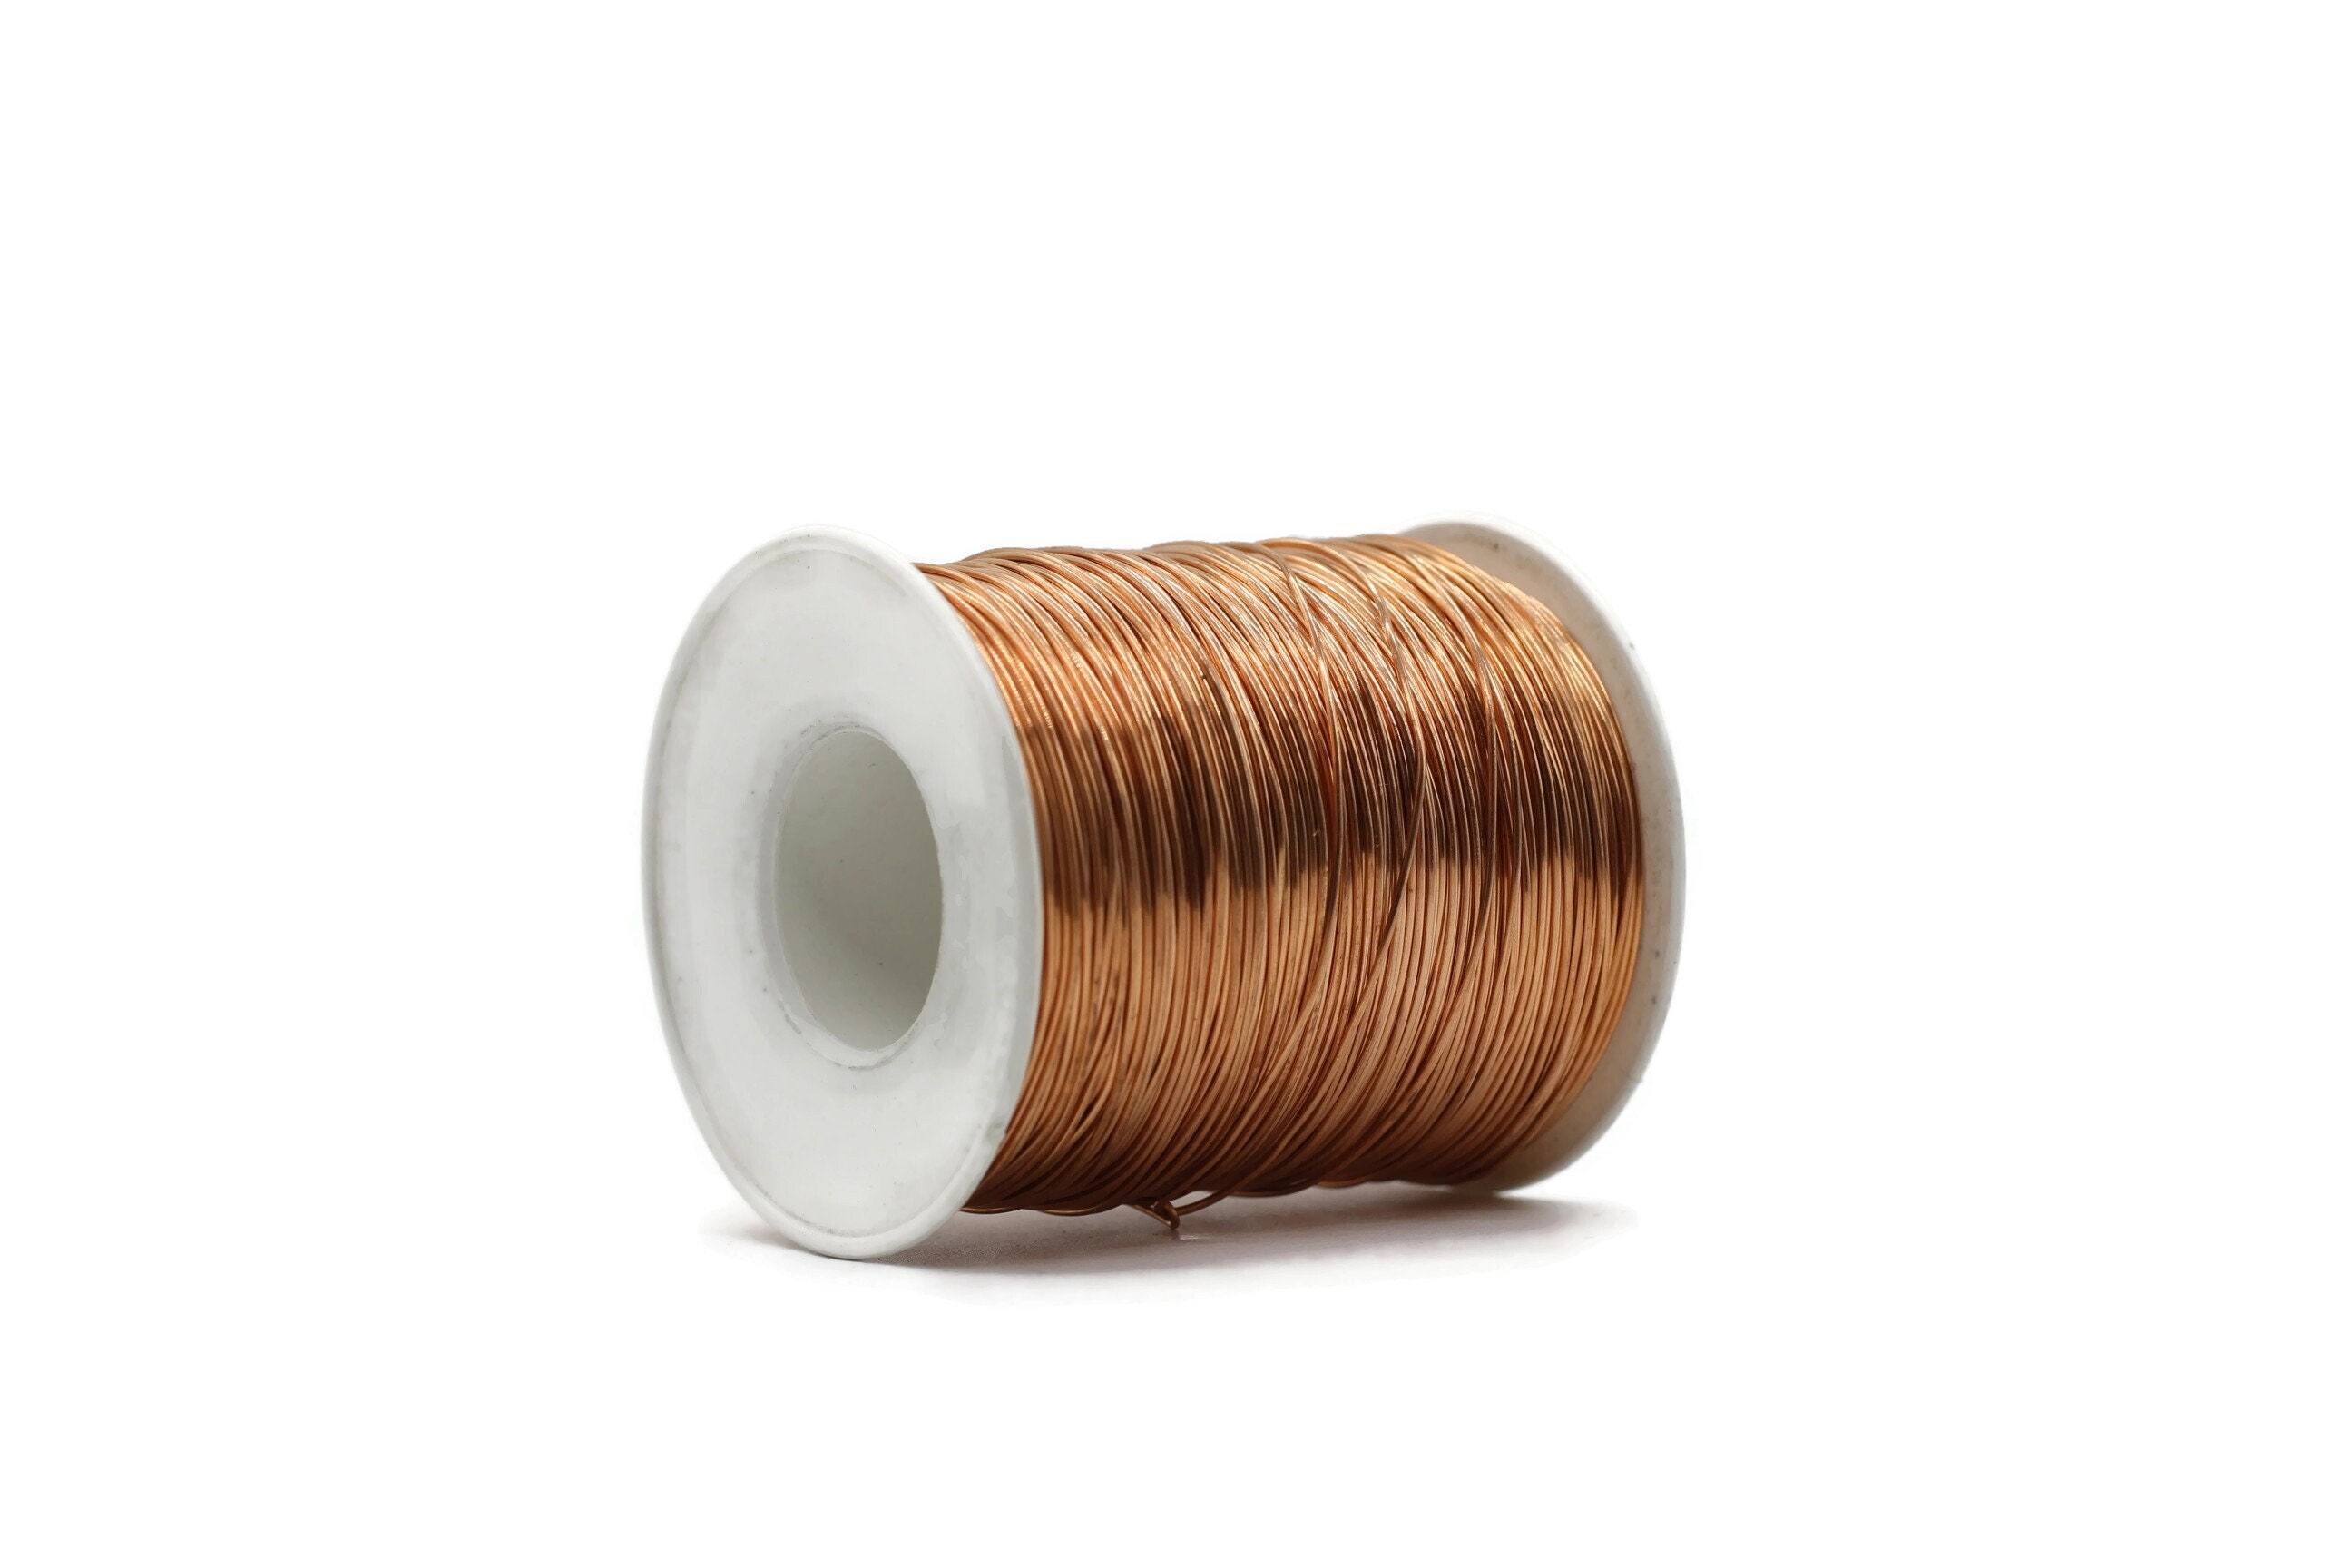 0.4mm Round Copper Wire 26 G Copper Wire Bare Copper Wire Jewelry Making  Supplies Wire Wrapping Supplies Jewelry Wire WCW026, 20 